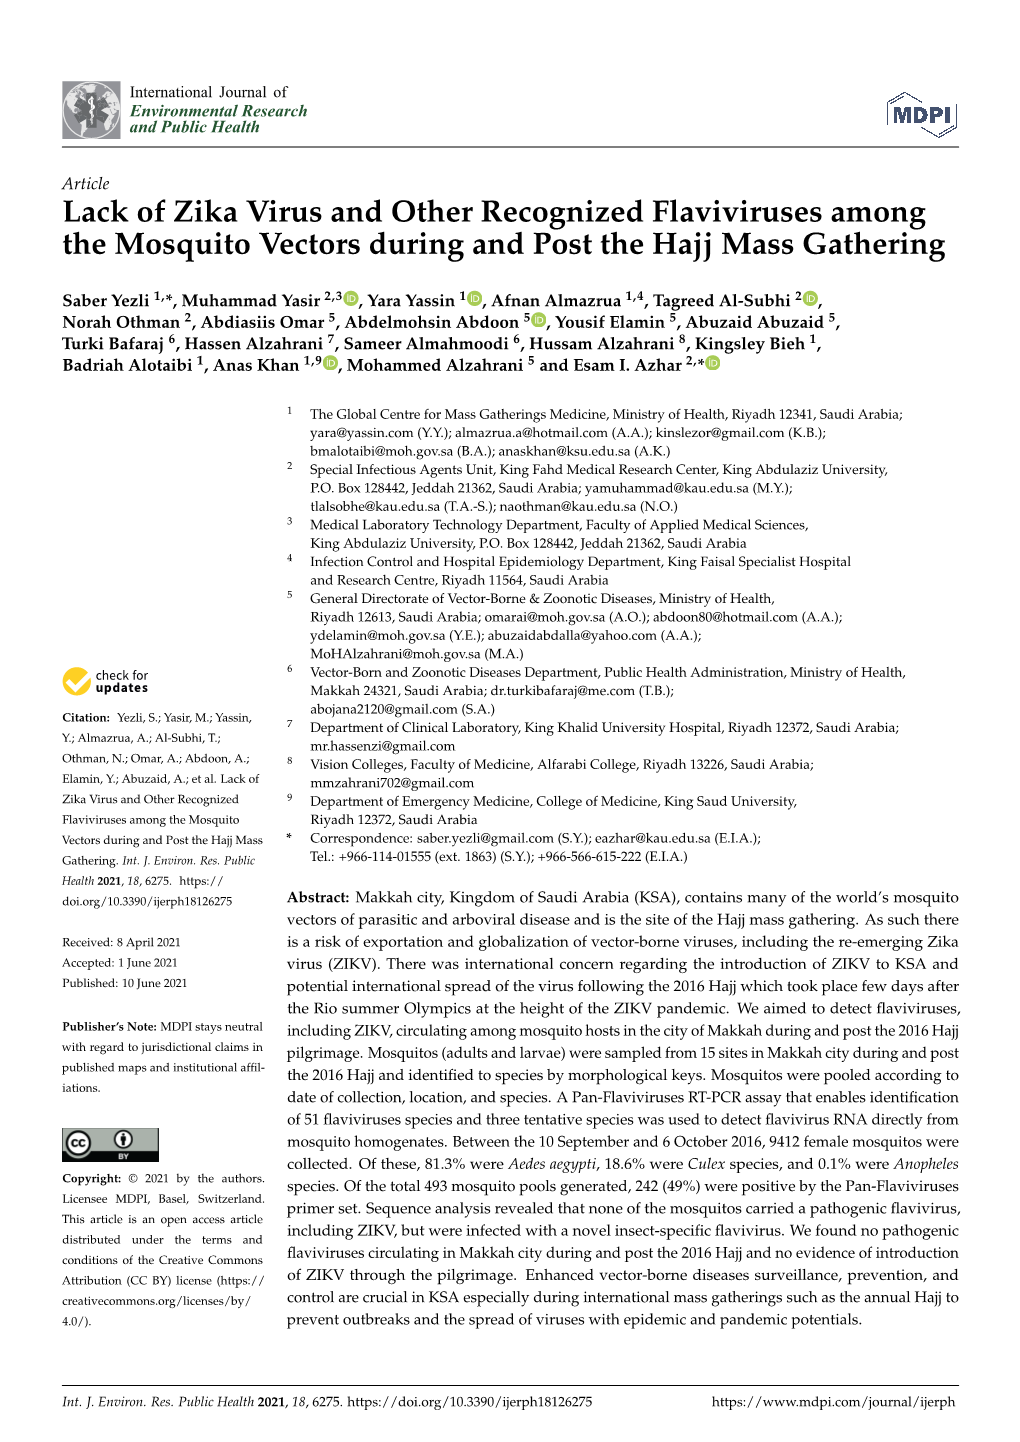 Lack of Zika Virus and Other Recognized Flaviviruses Among the Mosquito Vectors During and Post the Hajj Mass Gathering